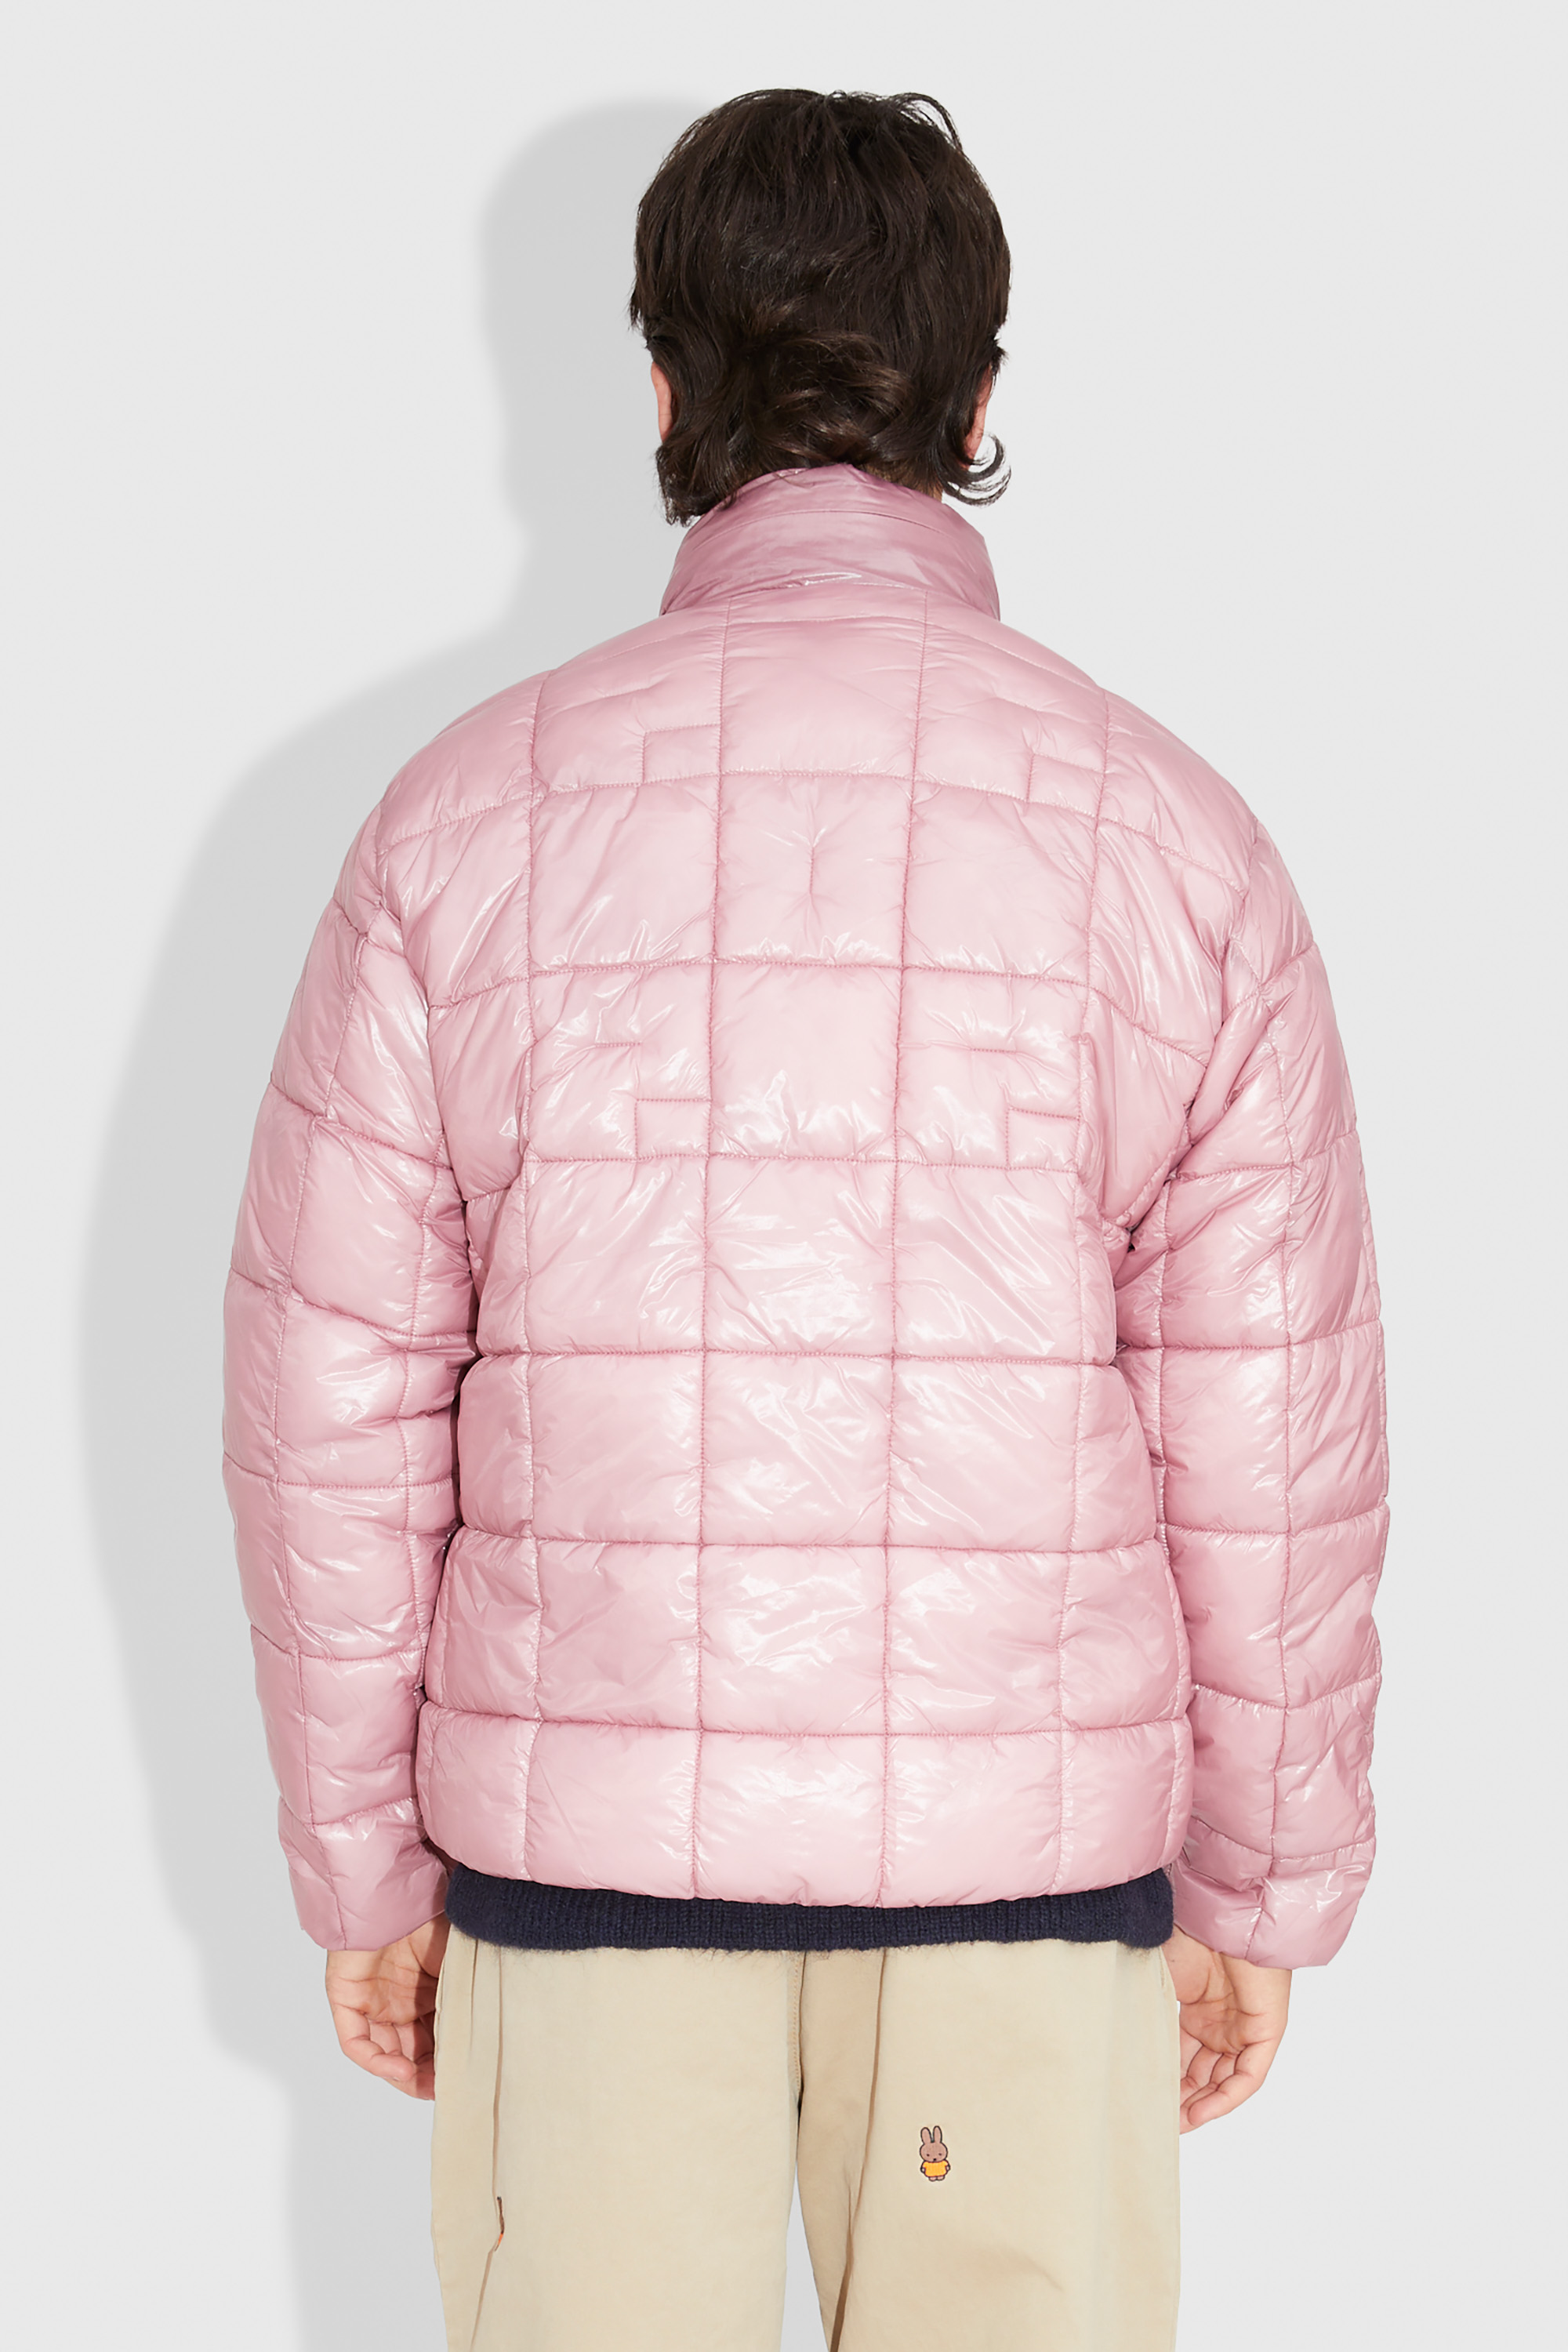 Pop Trading Company Quilted Reversible Puffer JKT Mesa rose/fired